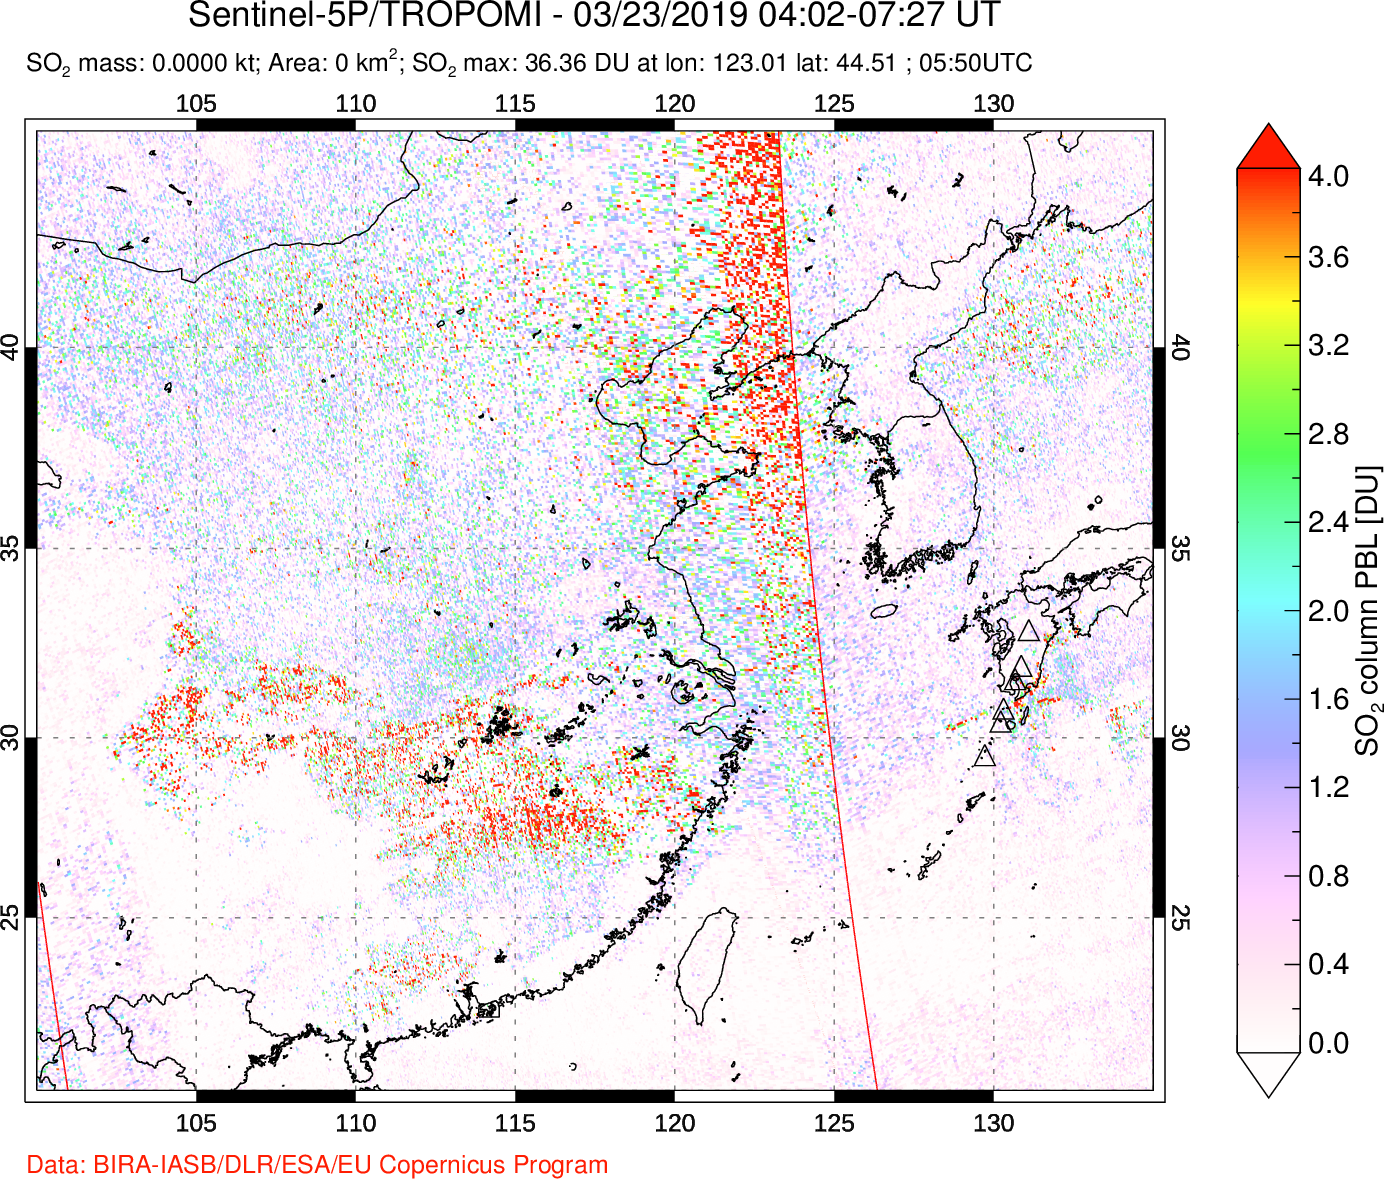 A sulfur dioxide image over Eastern China on Mar 23, 2019.